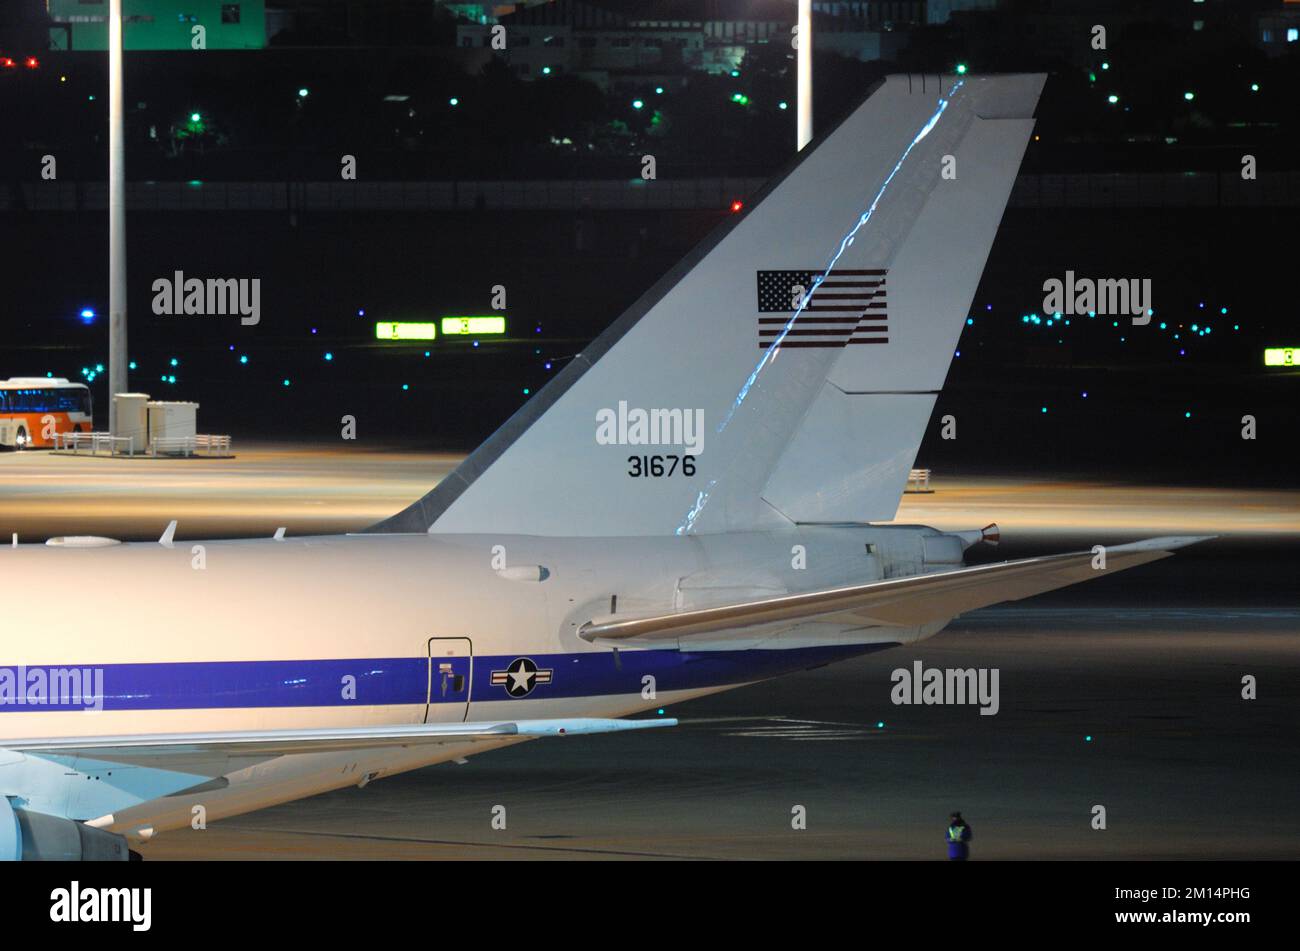 Tokyo, Giappone - 13 gennaio 2011: United States Air Force Boeing e-4B Nightwatch Vertical Find. Foto Stock